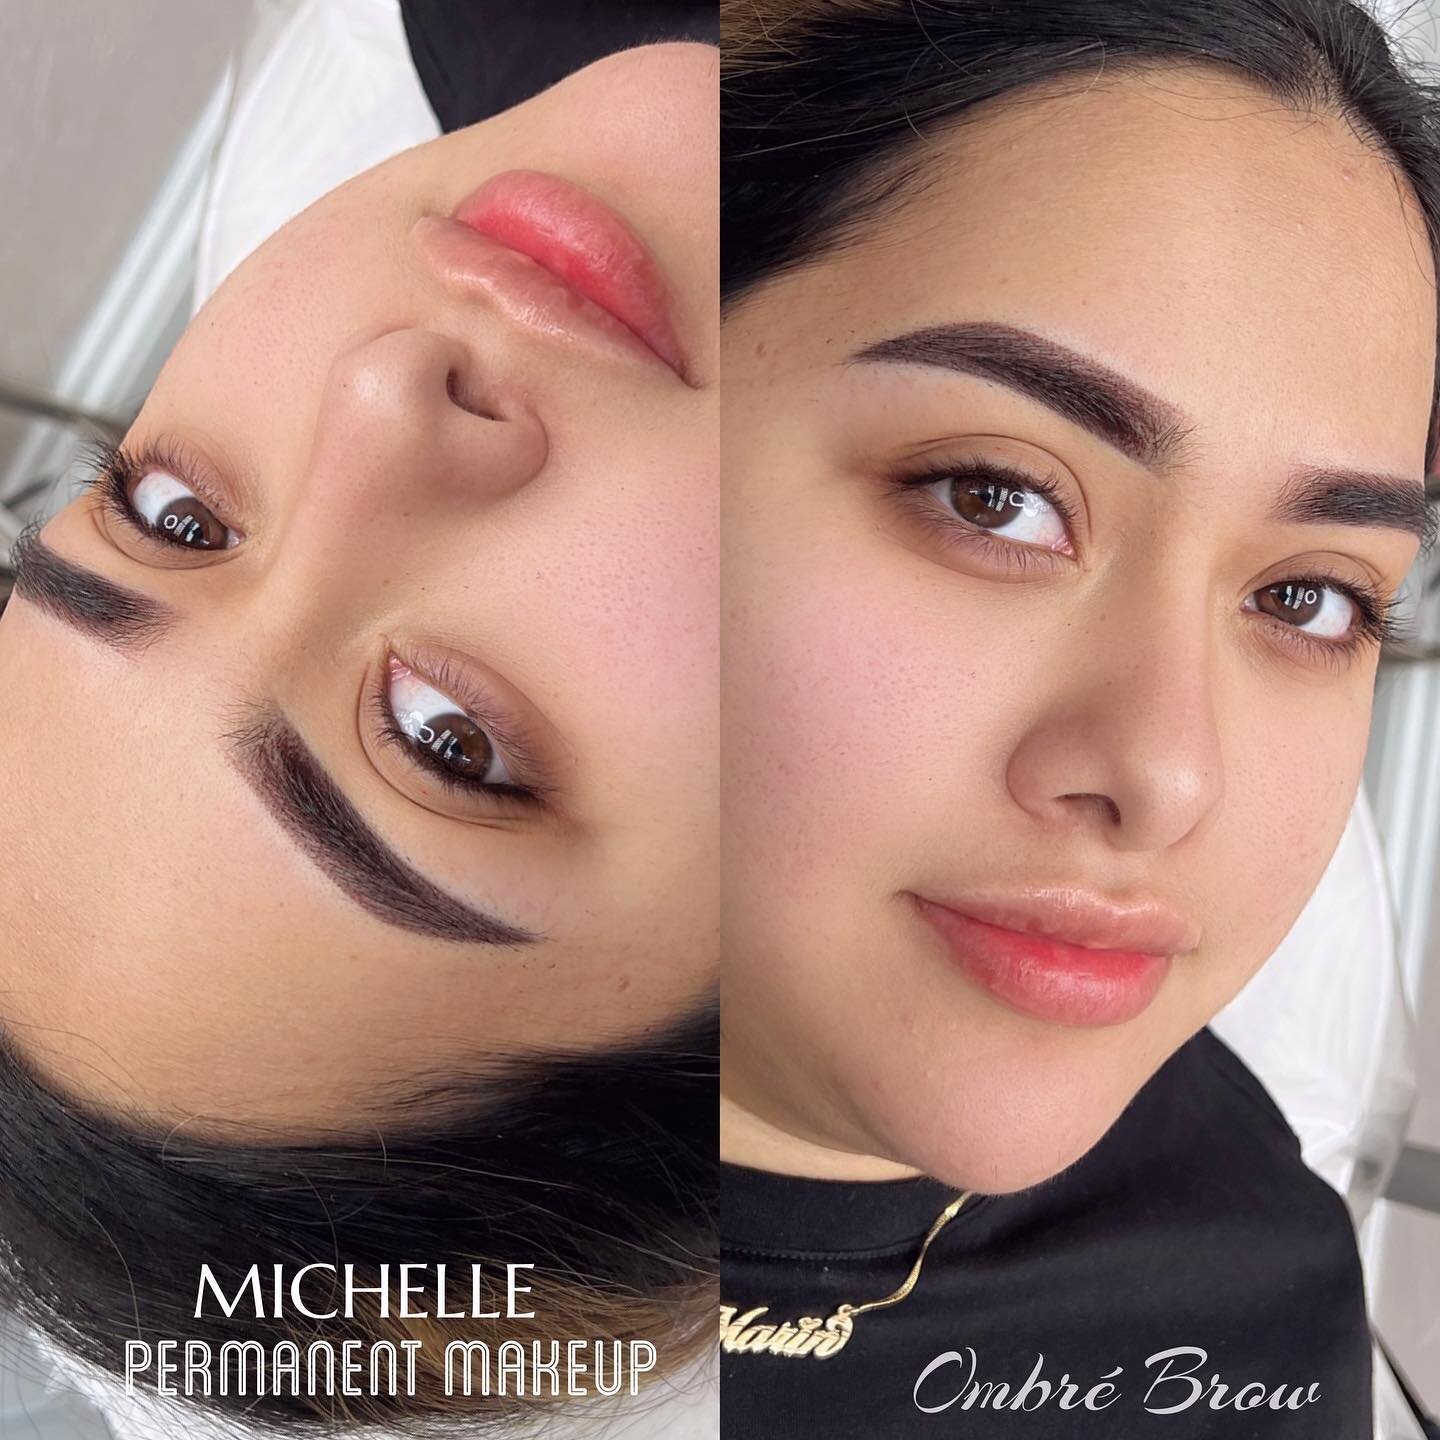 Ombr&eacute; Brow 💕

Ditch your brow pencil and wake up every morning feeling beautiful and ready to go work! 

#michellepmu #michellepermanentmakeup #eyebrows #pmu #eyebrow #brows #brow #ombrebrows #microblading #microshading #ombrepowderbrow #eyeb